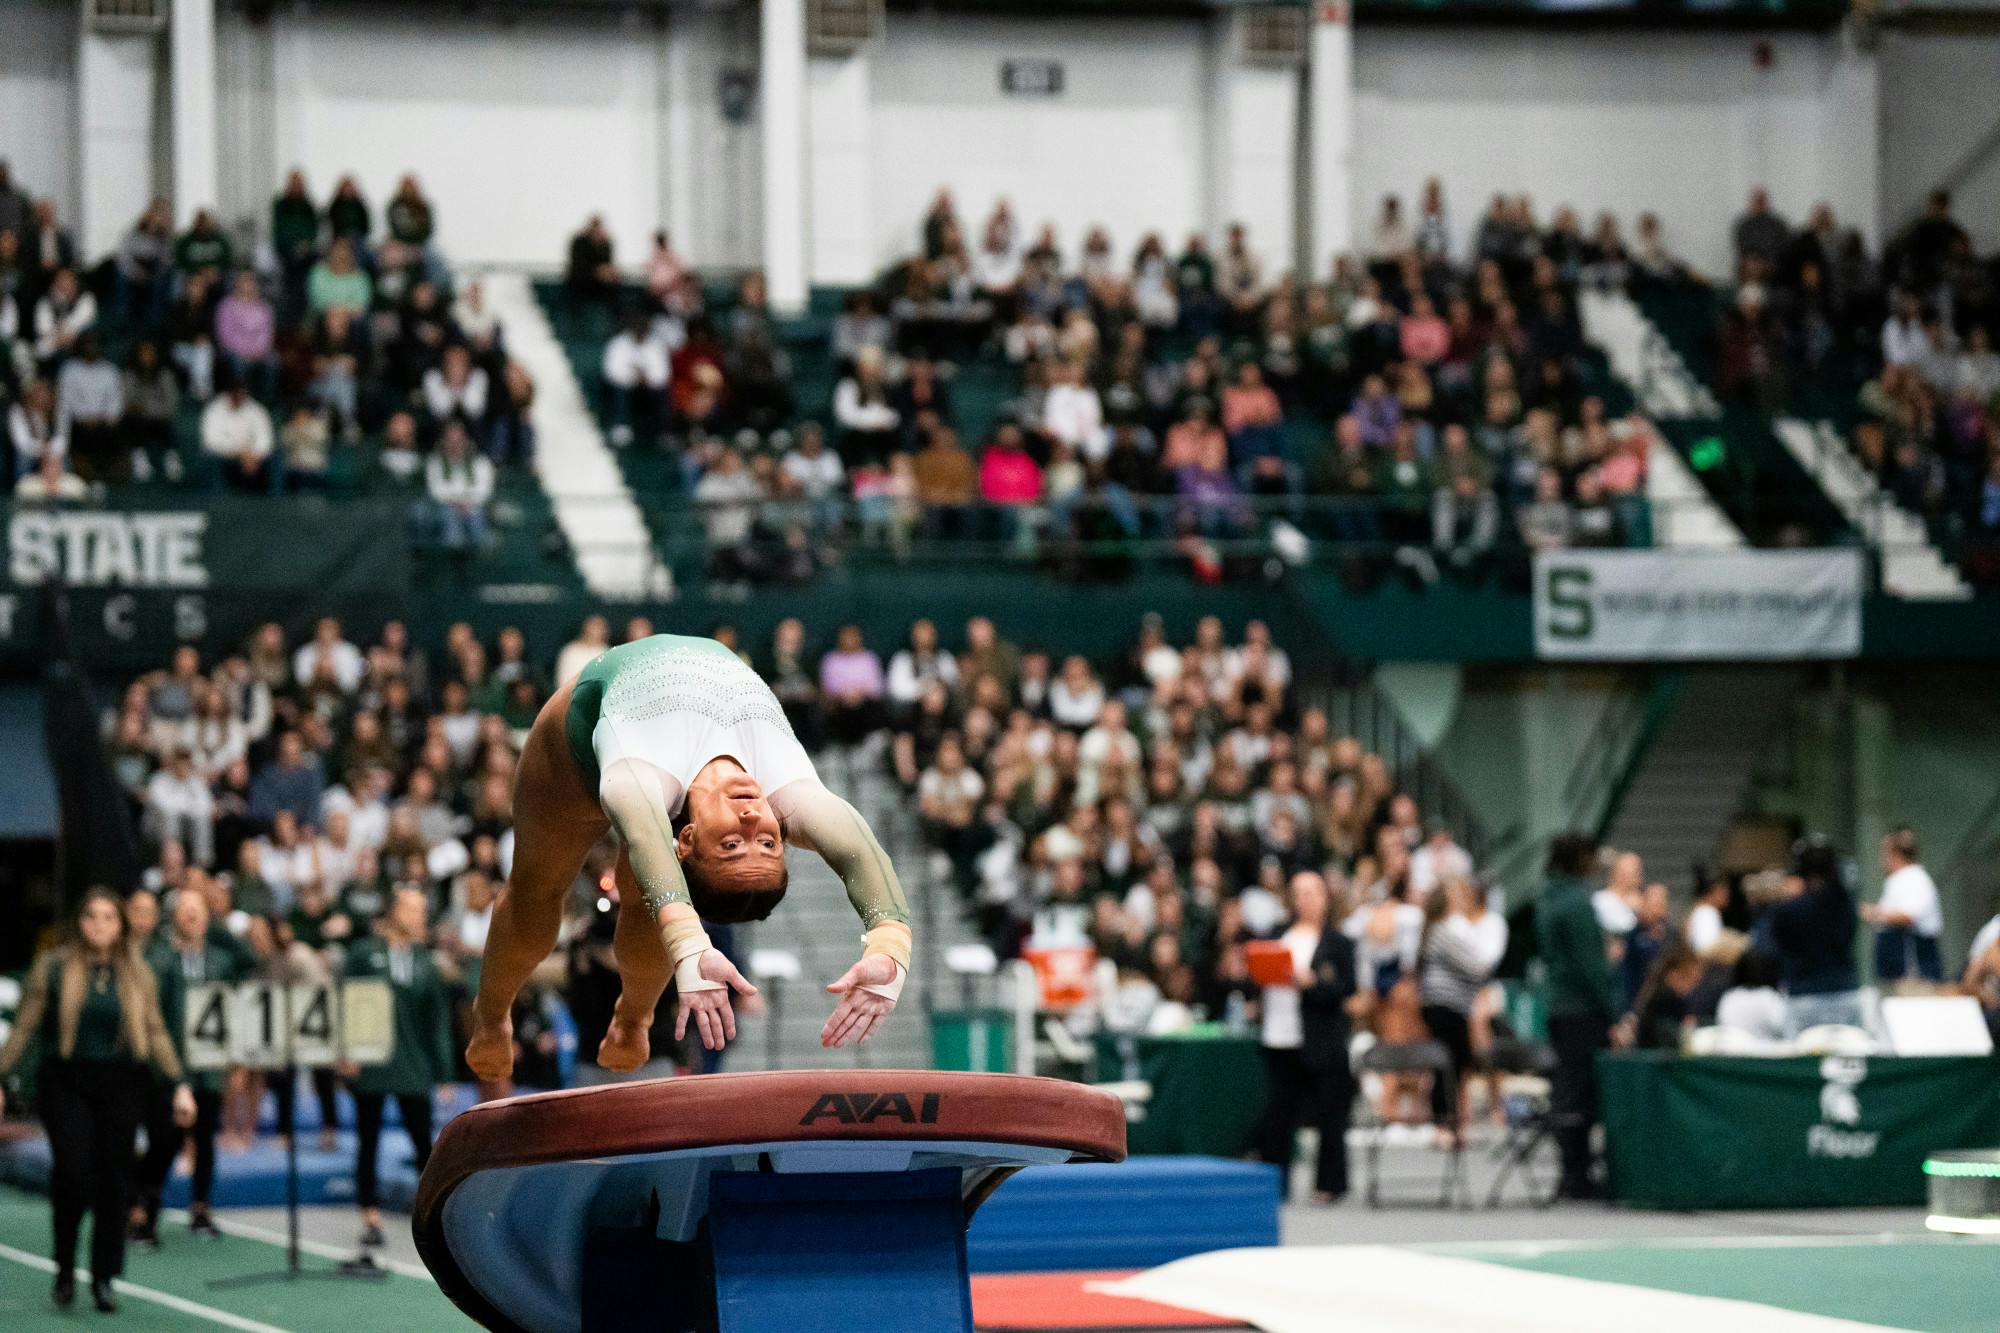 <p>Junior All-Around Baleigh Garcia flips during her vault routine at the MSU v.s. Penn State meet at the Jenison Field House on Feb. 4, 2023. The Spartans beat the Nittany Lions 197.450 - 195.475.</p>